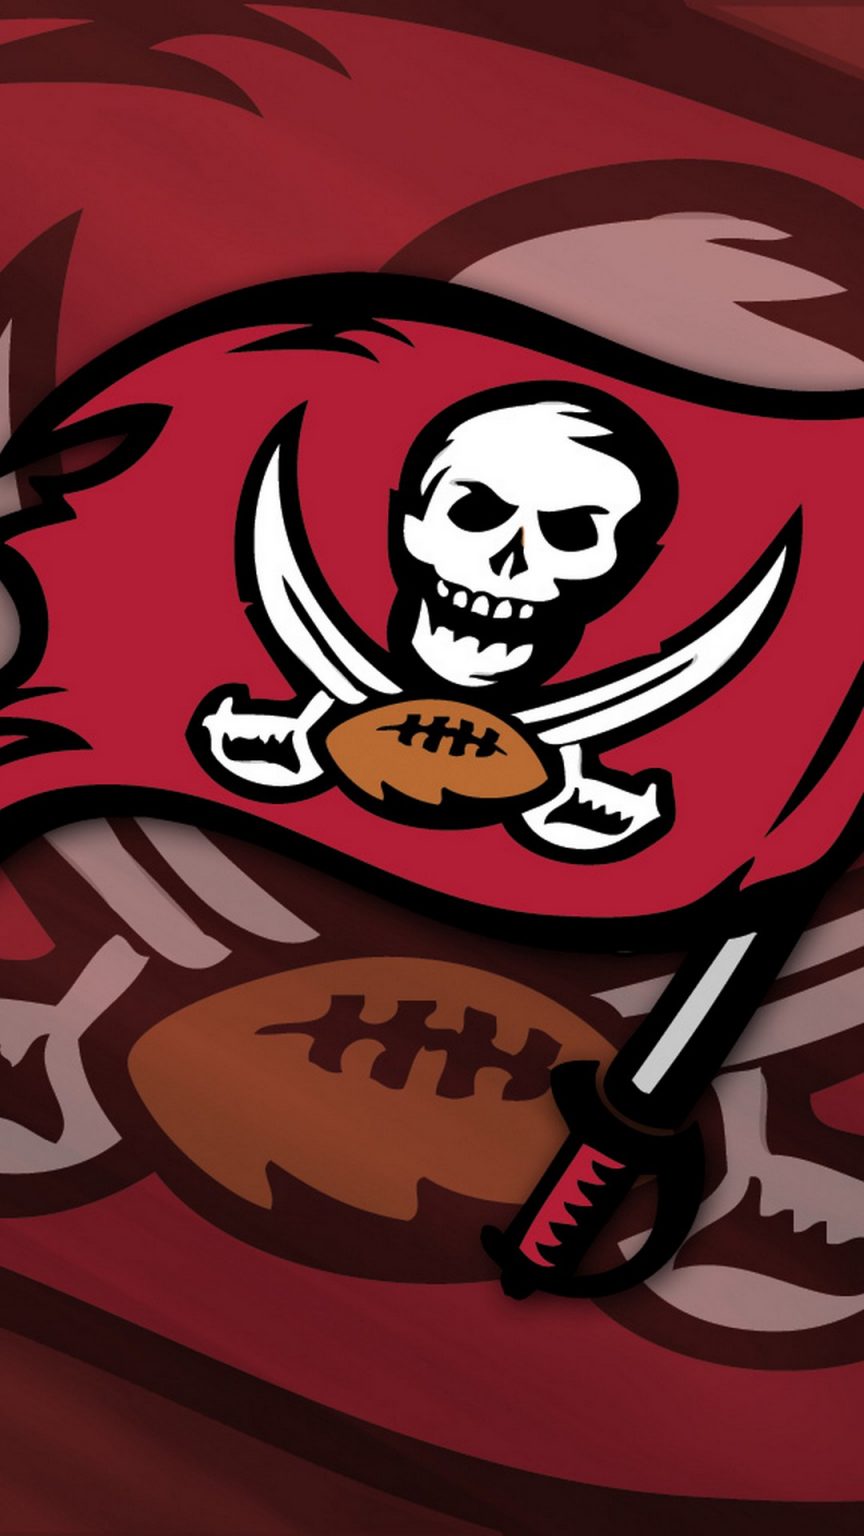 Tampa Bay Buccaneers Logo iPhone Wallpaper High Quality - 2021 NFL ...